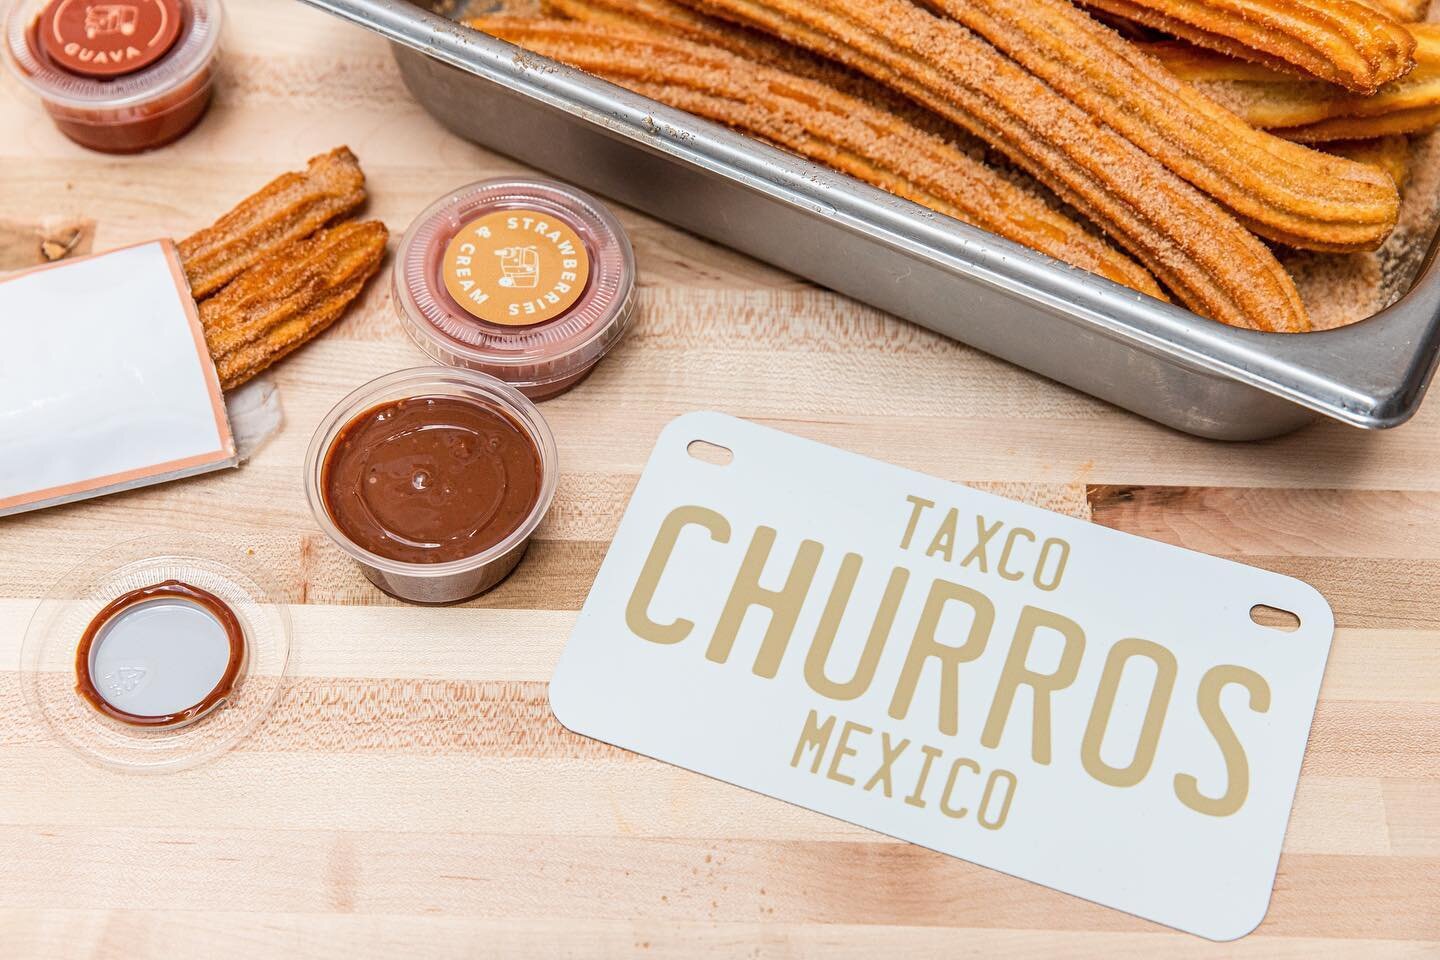 SPECIAL ANNOUNCEMENT:
We will be OPEN for Super Bowl Sunday! What&rsquo;s one thing that could make the game even better!? Eating hot, FRESH churros while you watch!
&bull;
The game starts at 5:30pm. We&rsquo;ll be open 4:30pm- 11:30pm this Sunday, s